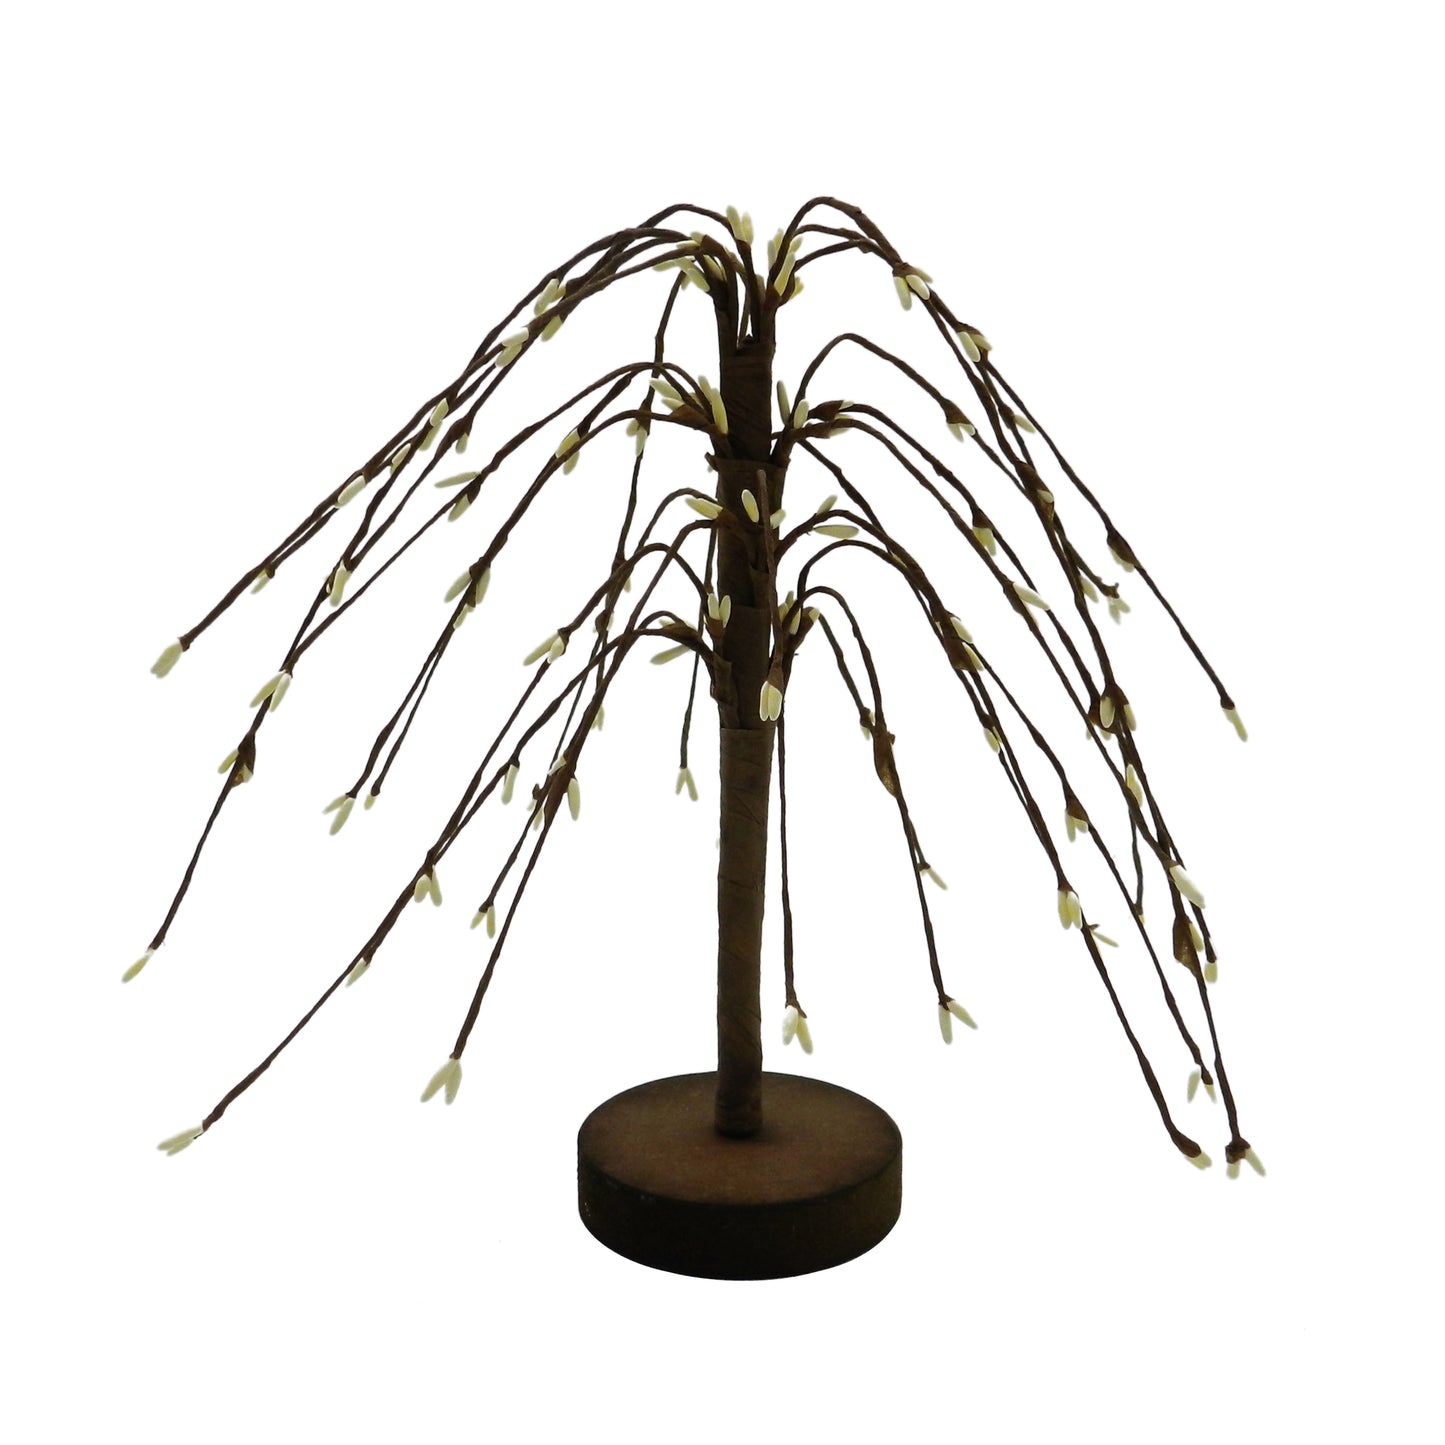 CVHOMEDECO. Cream Pip Berry Weeping Willow Tree Rustic Vintage Decoration Art, 7 Inch